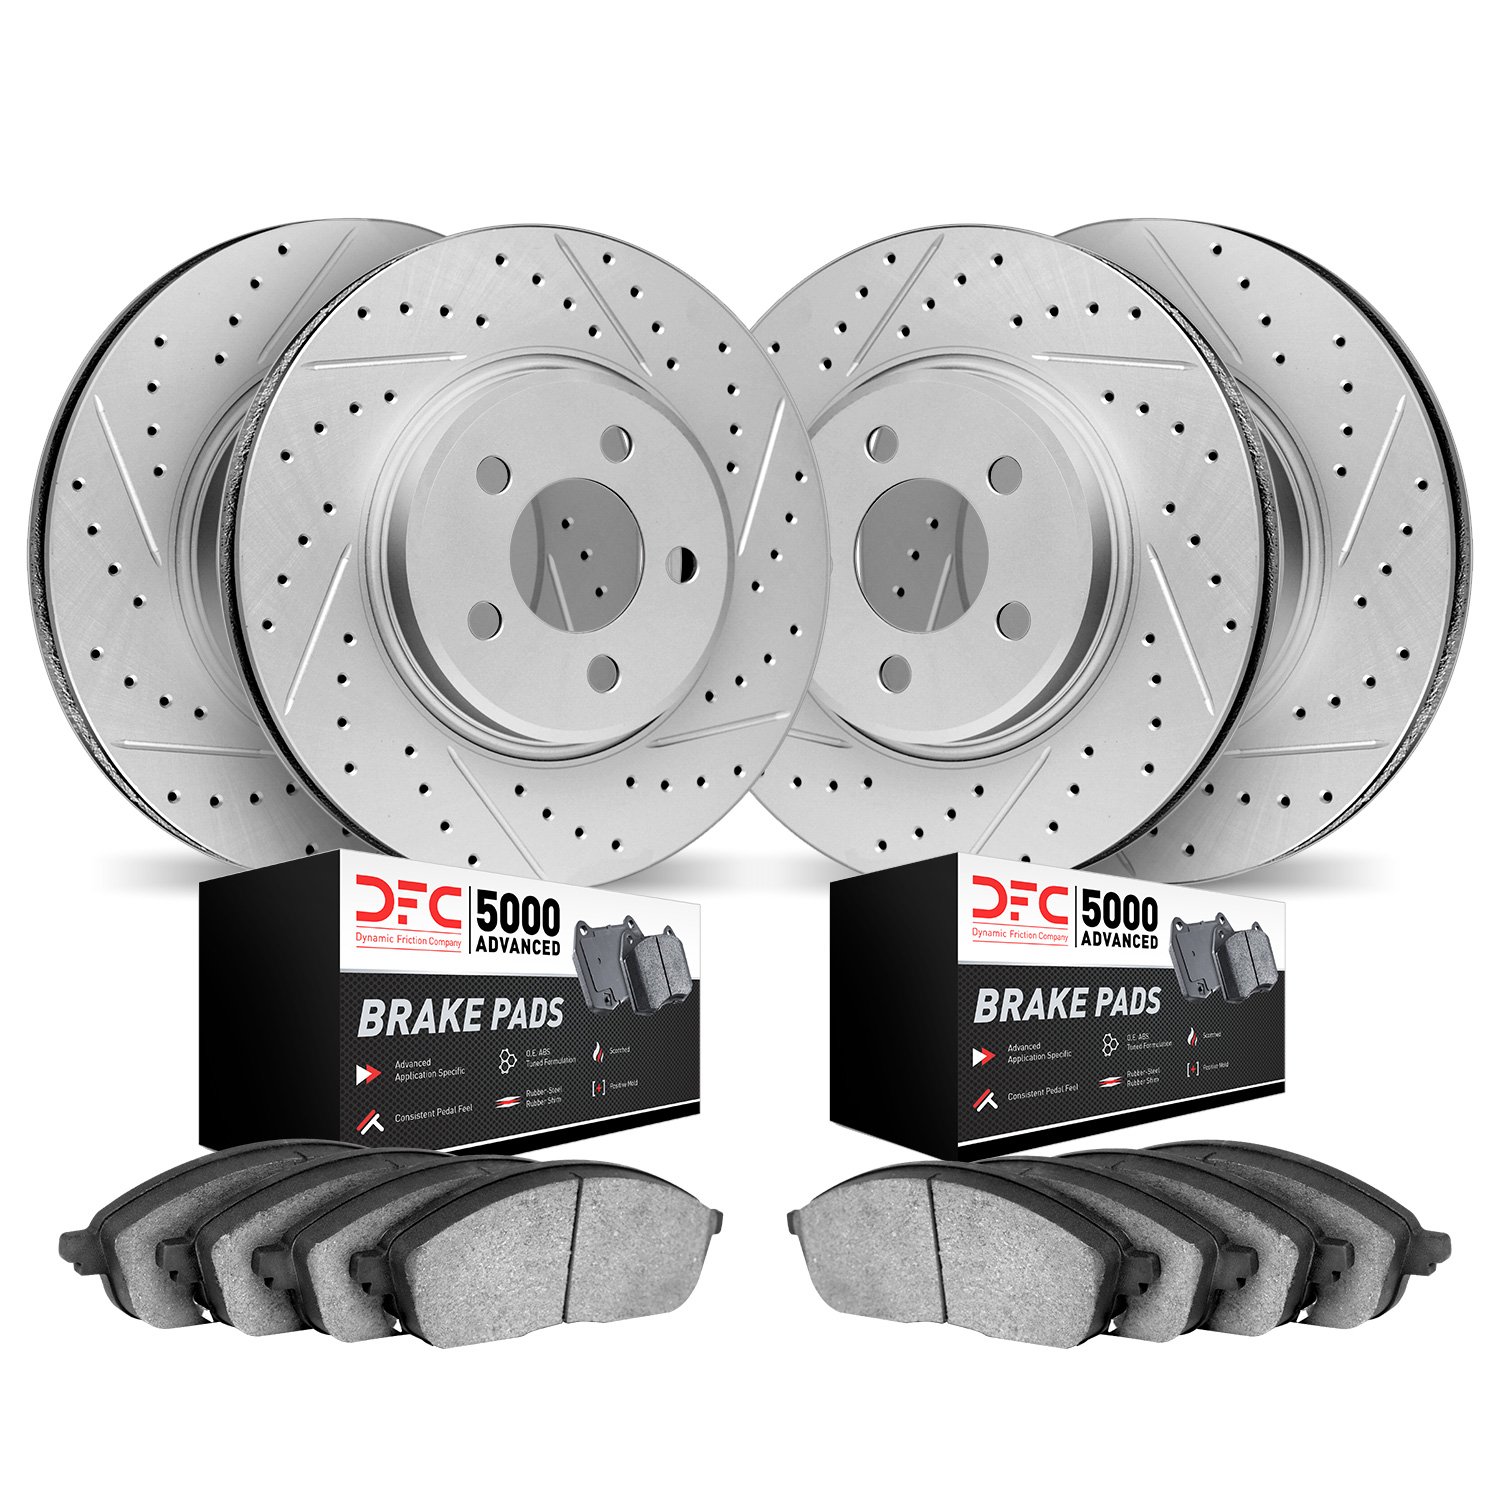 2504-75008 Geoperformance Drilled/Slotted Rotors w/5000 Advanced Brake Pads Kit, Fits Select Lexus/Toyota/Scion, Position: Front